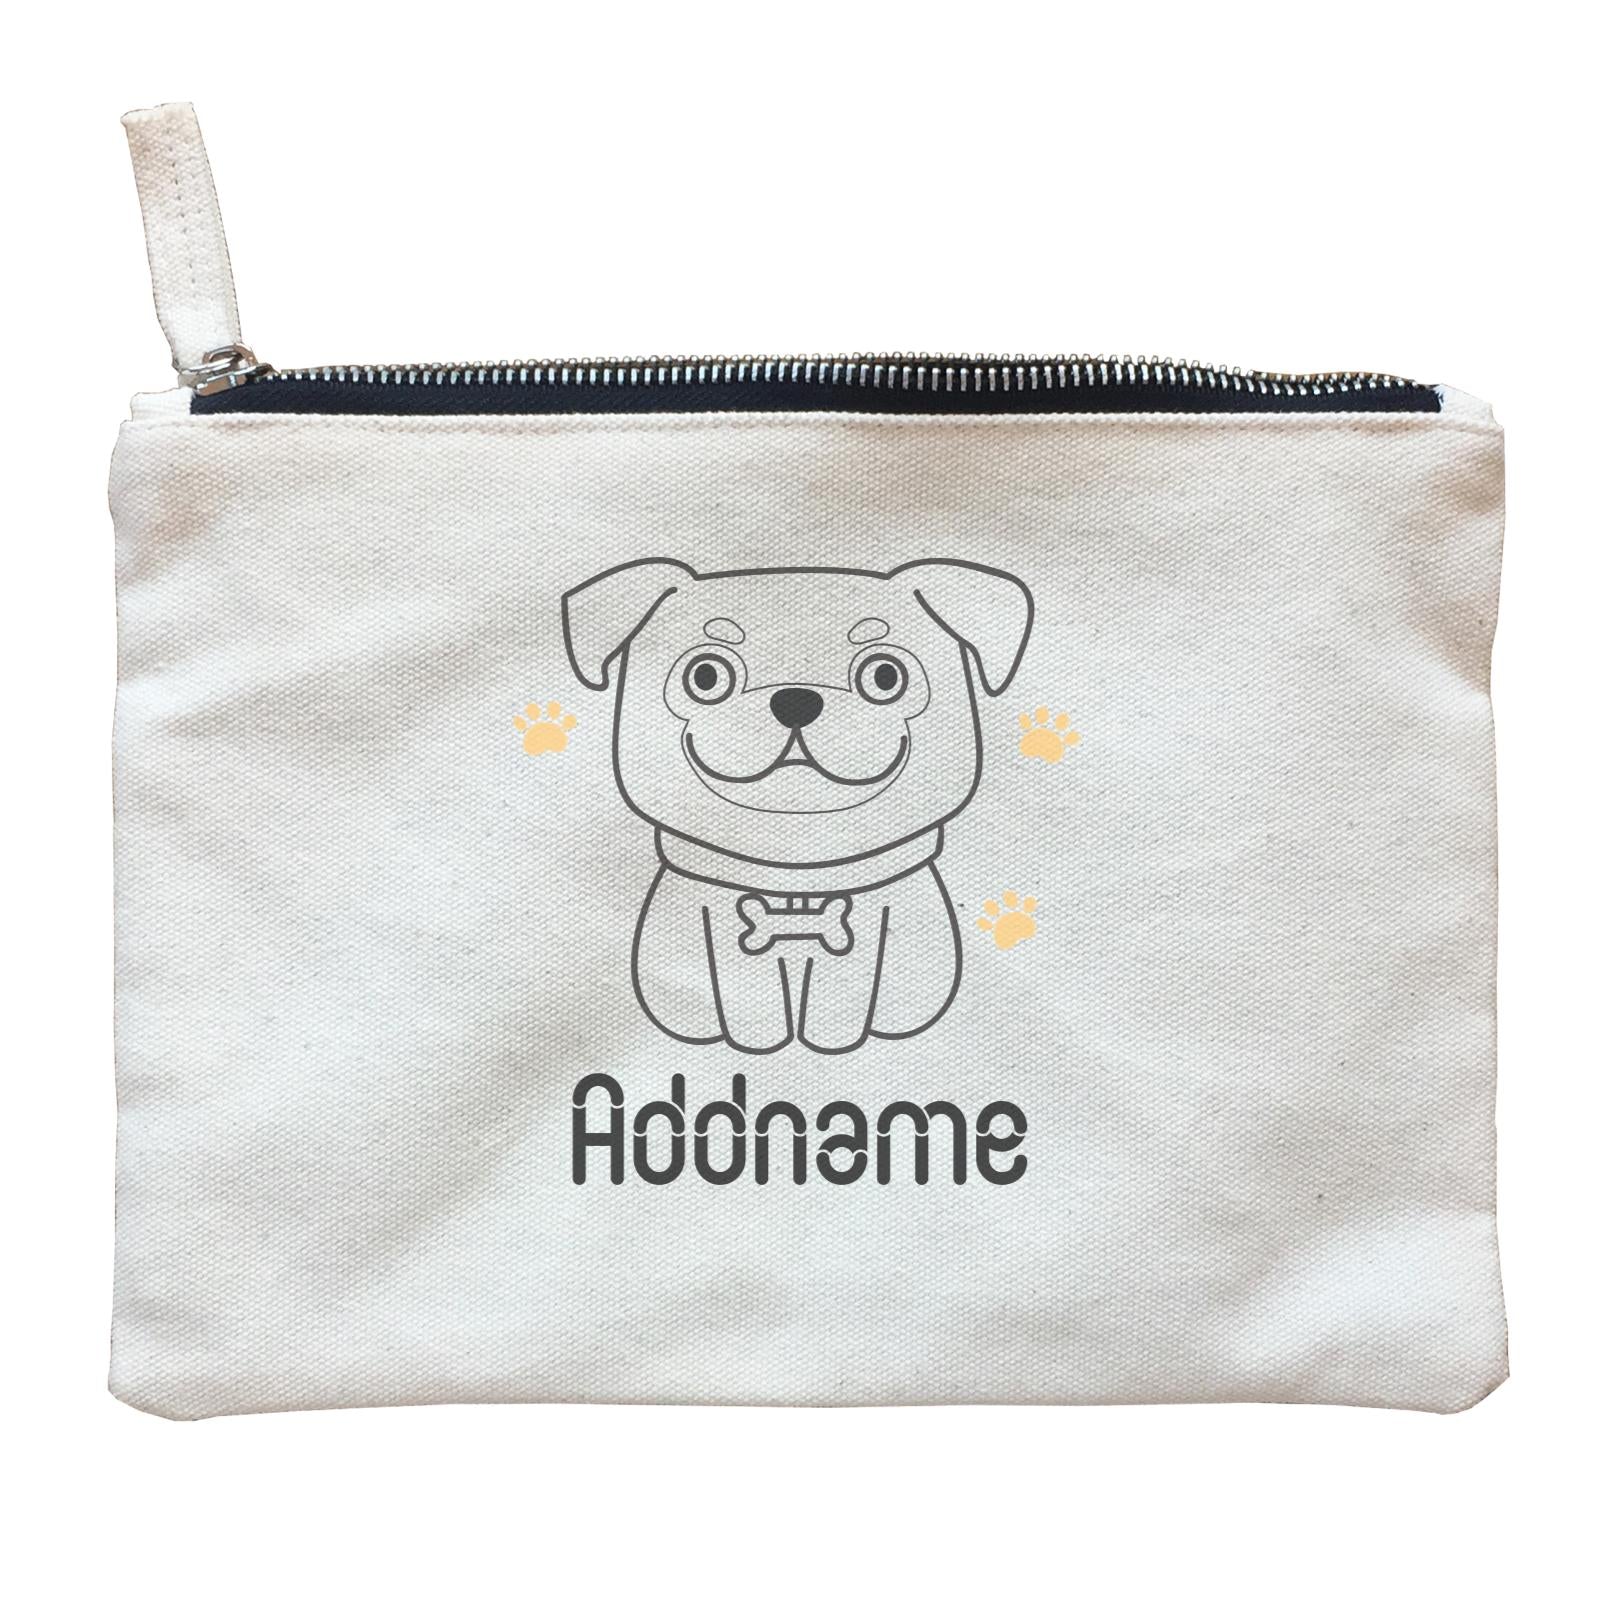 Coloring Outline Cute Hand Drawn Animals Dogs Pug Addname Zipper Pouch